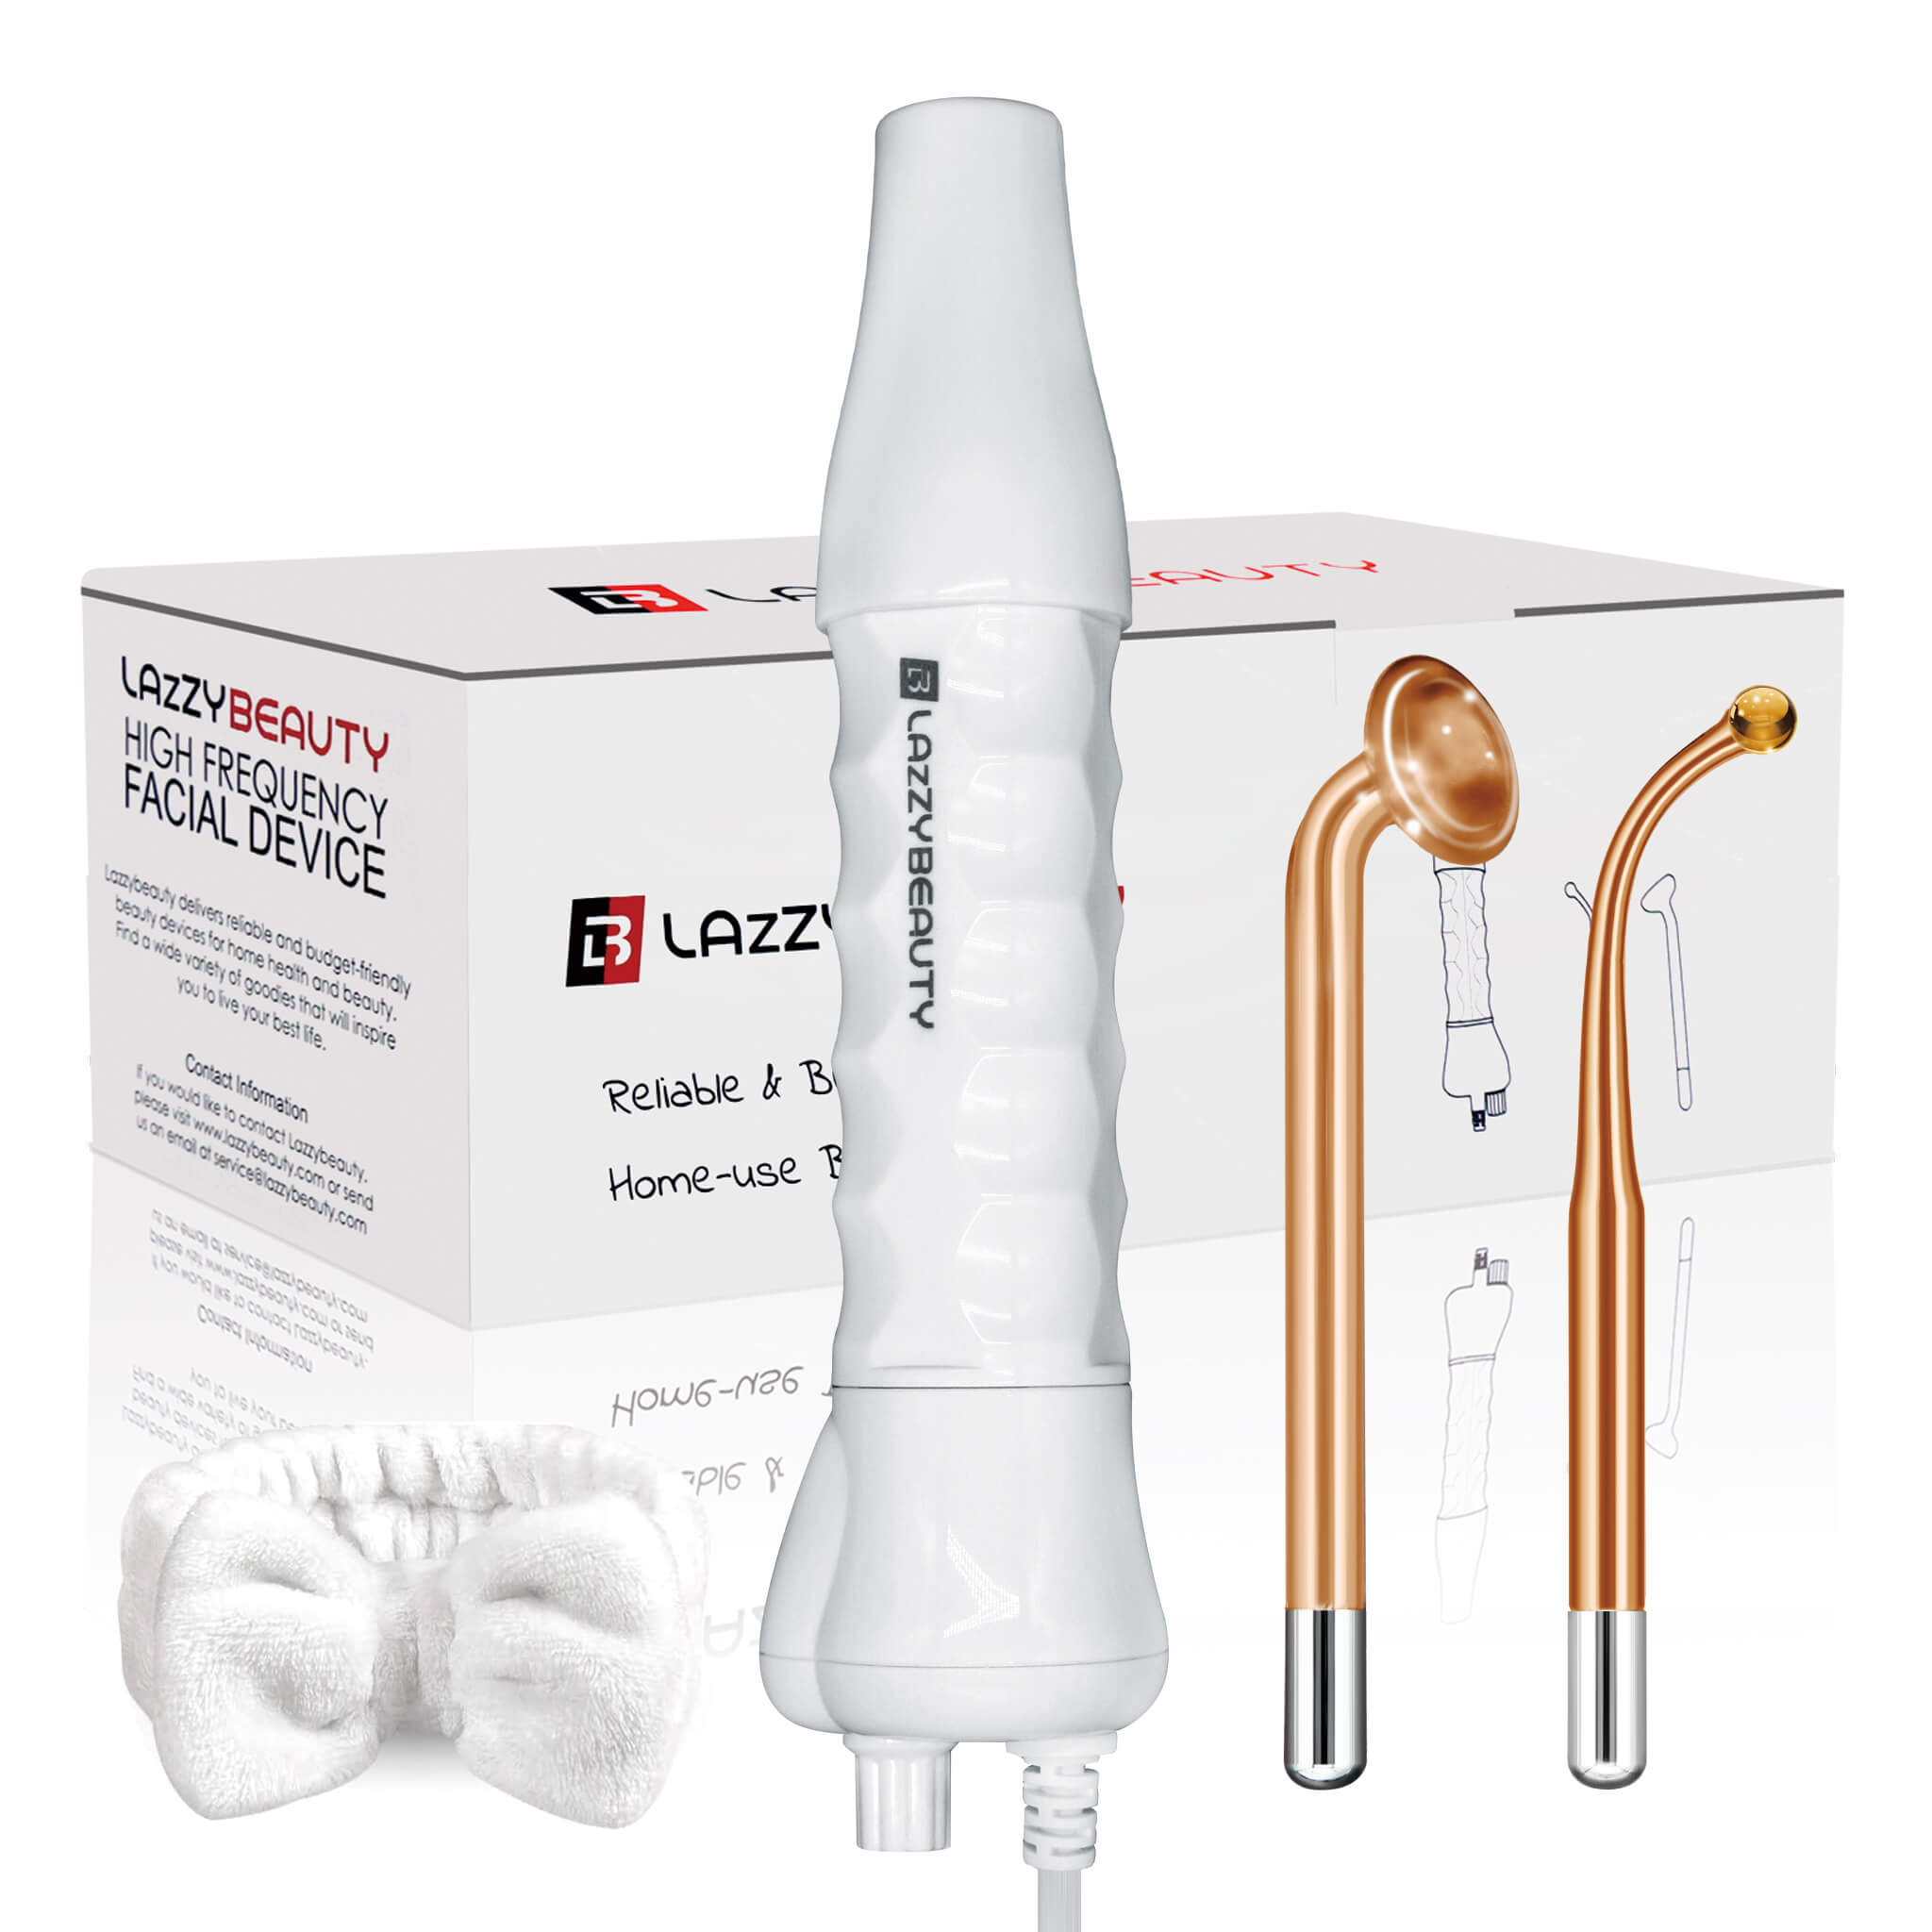 Lazzybeauty 2in1 High Frequency Facial Wand picture photo